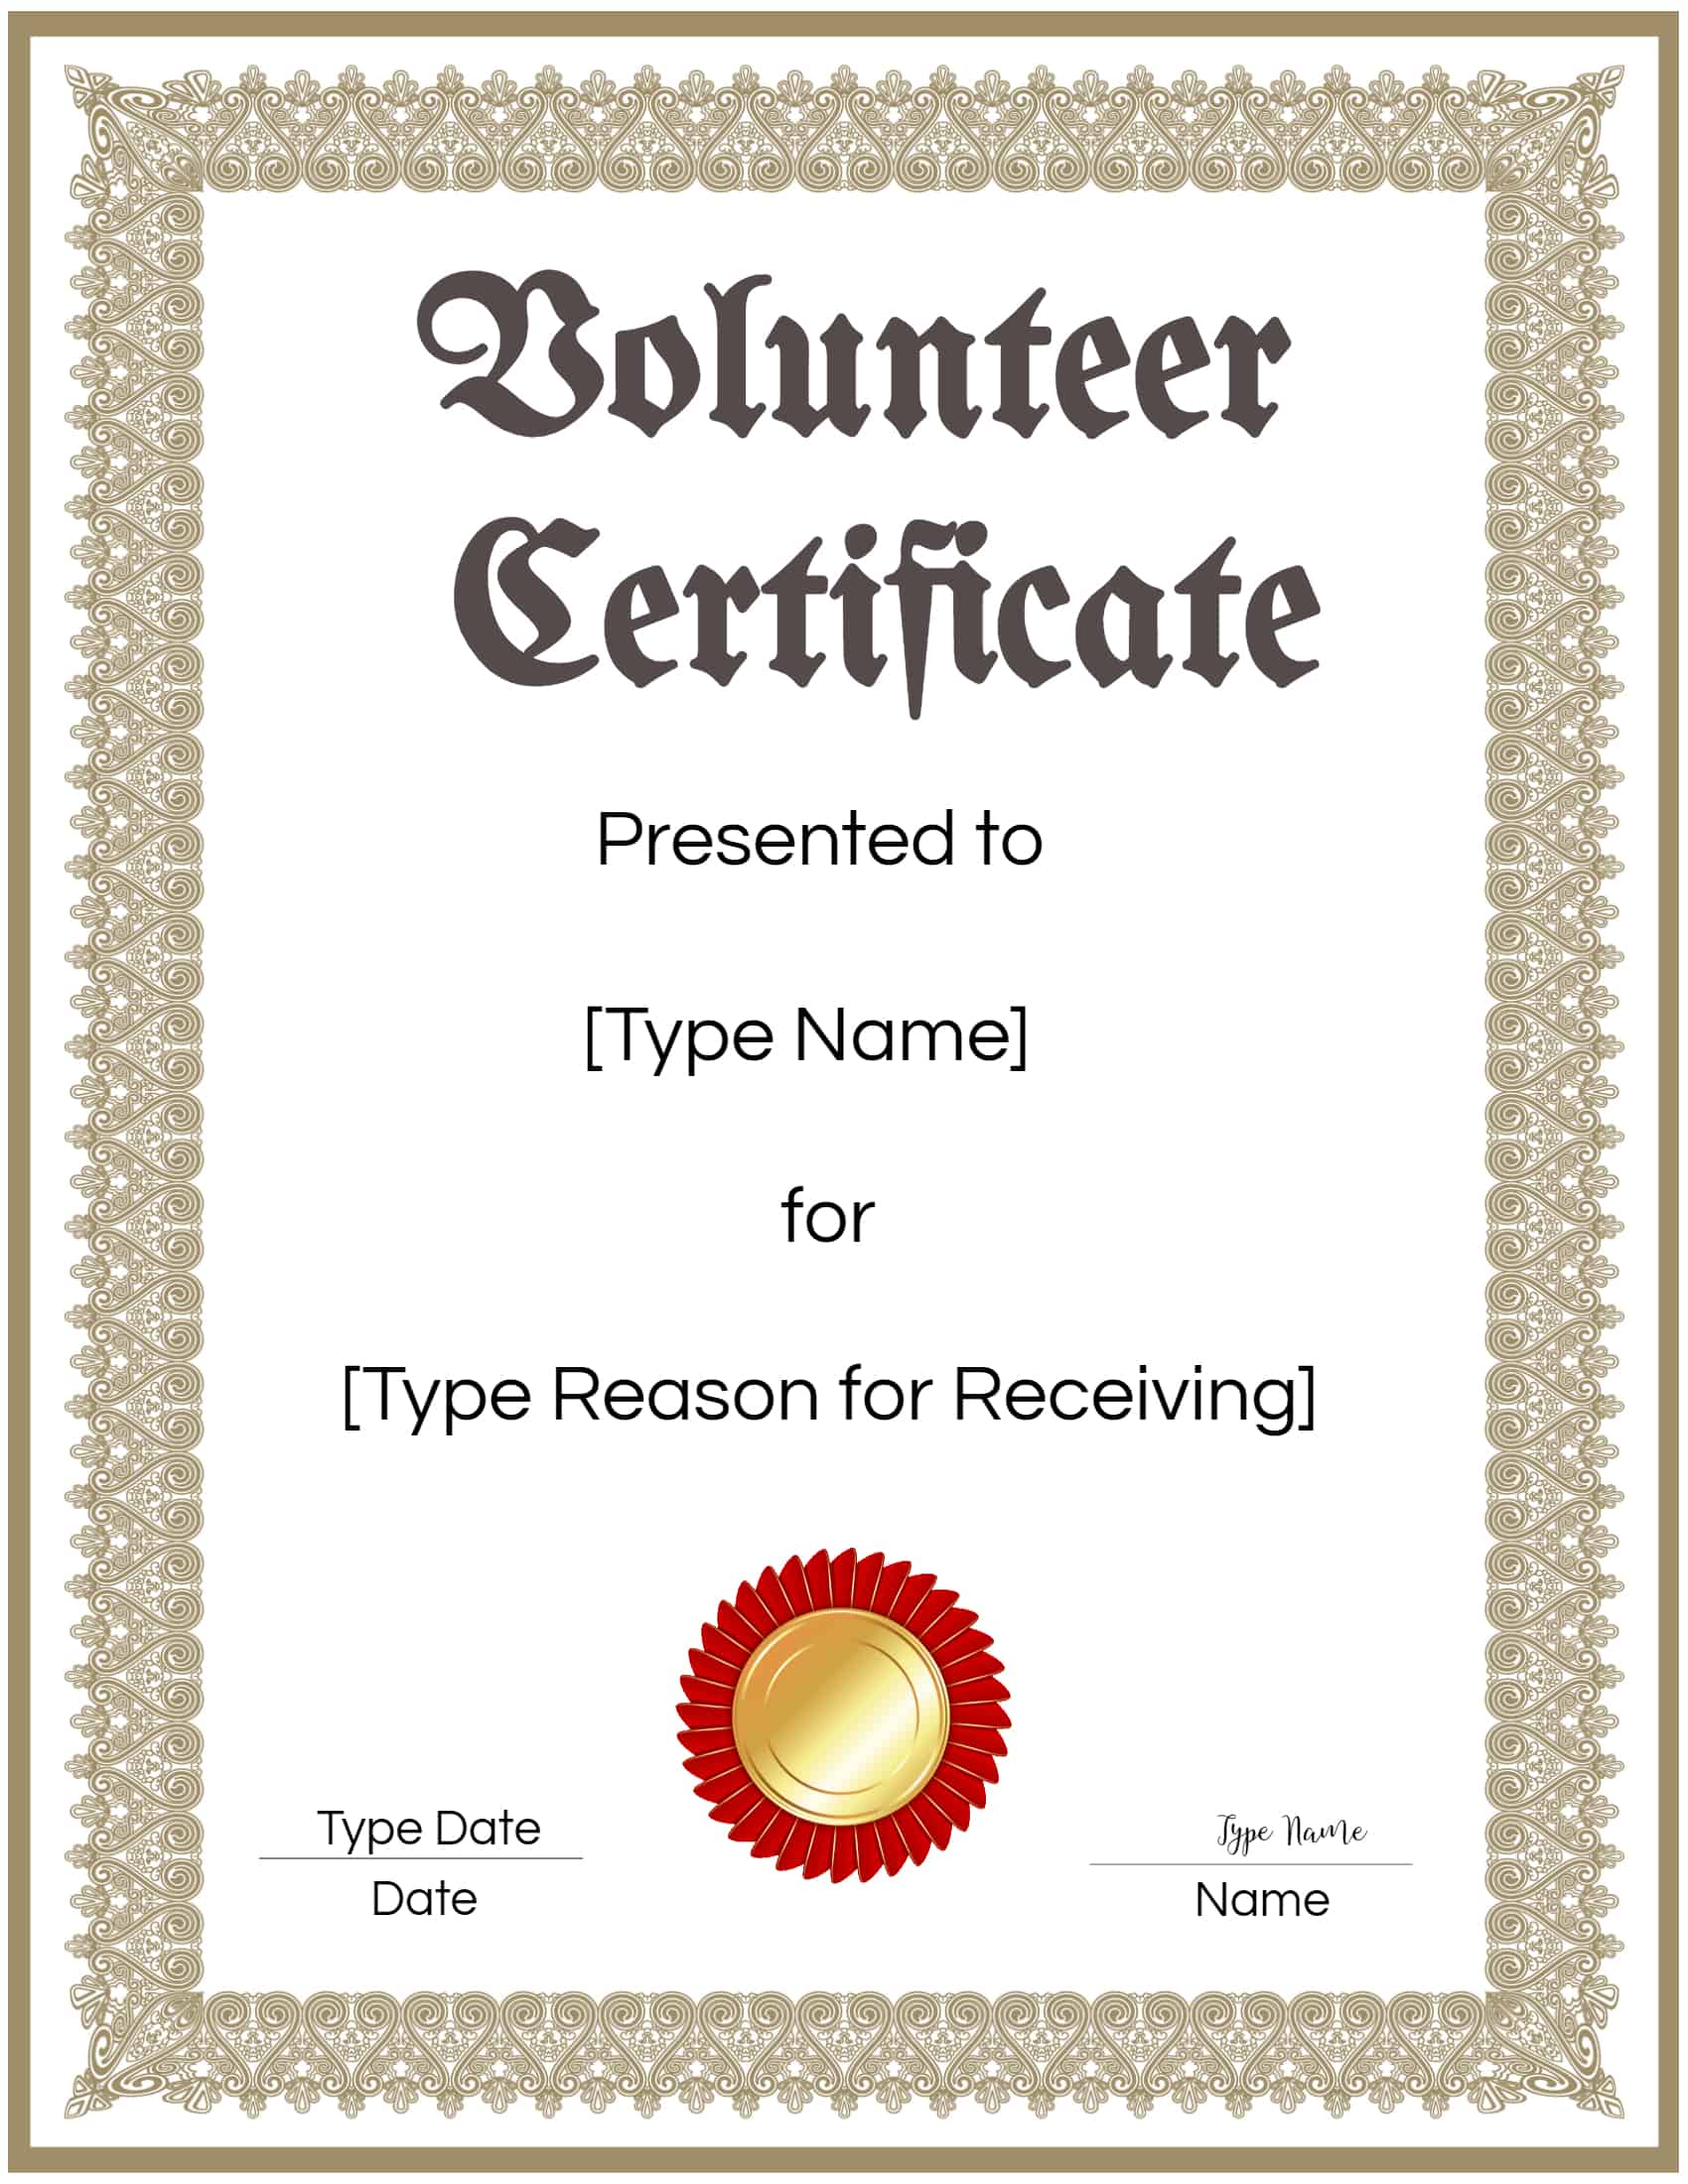 FREE Volunteer Certificate Template Many Designs Are Available